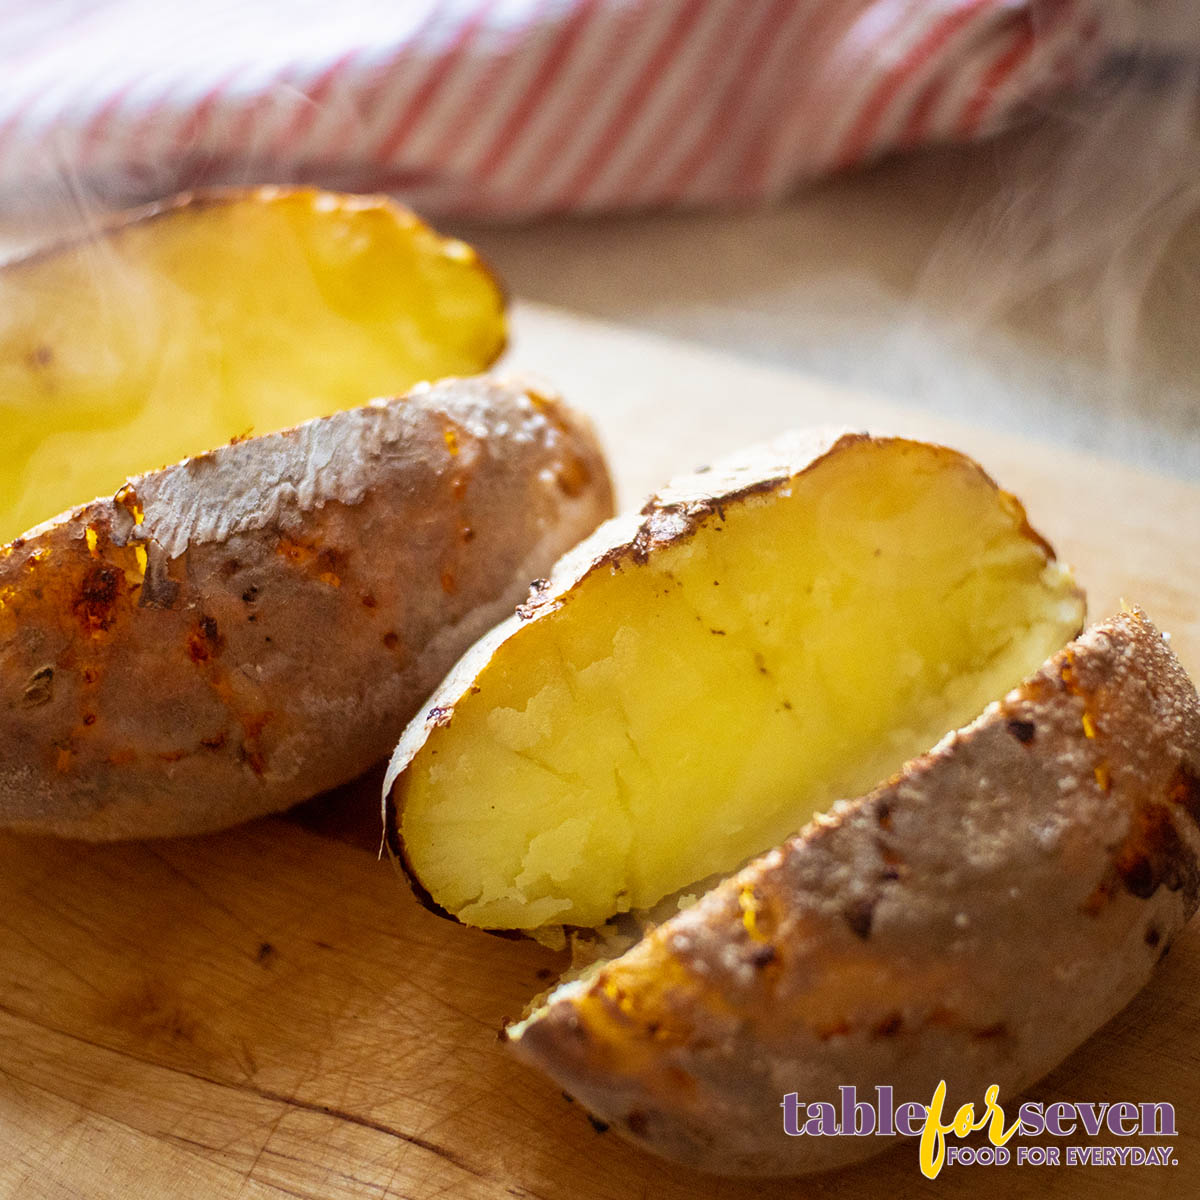 Steaming baked potatoes